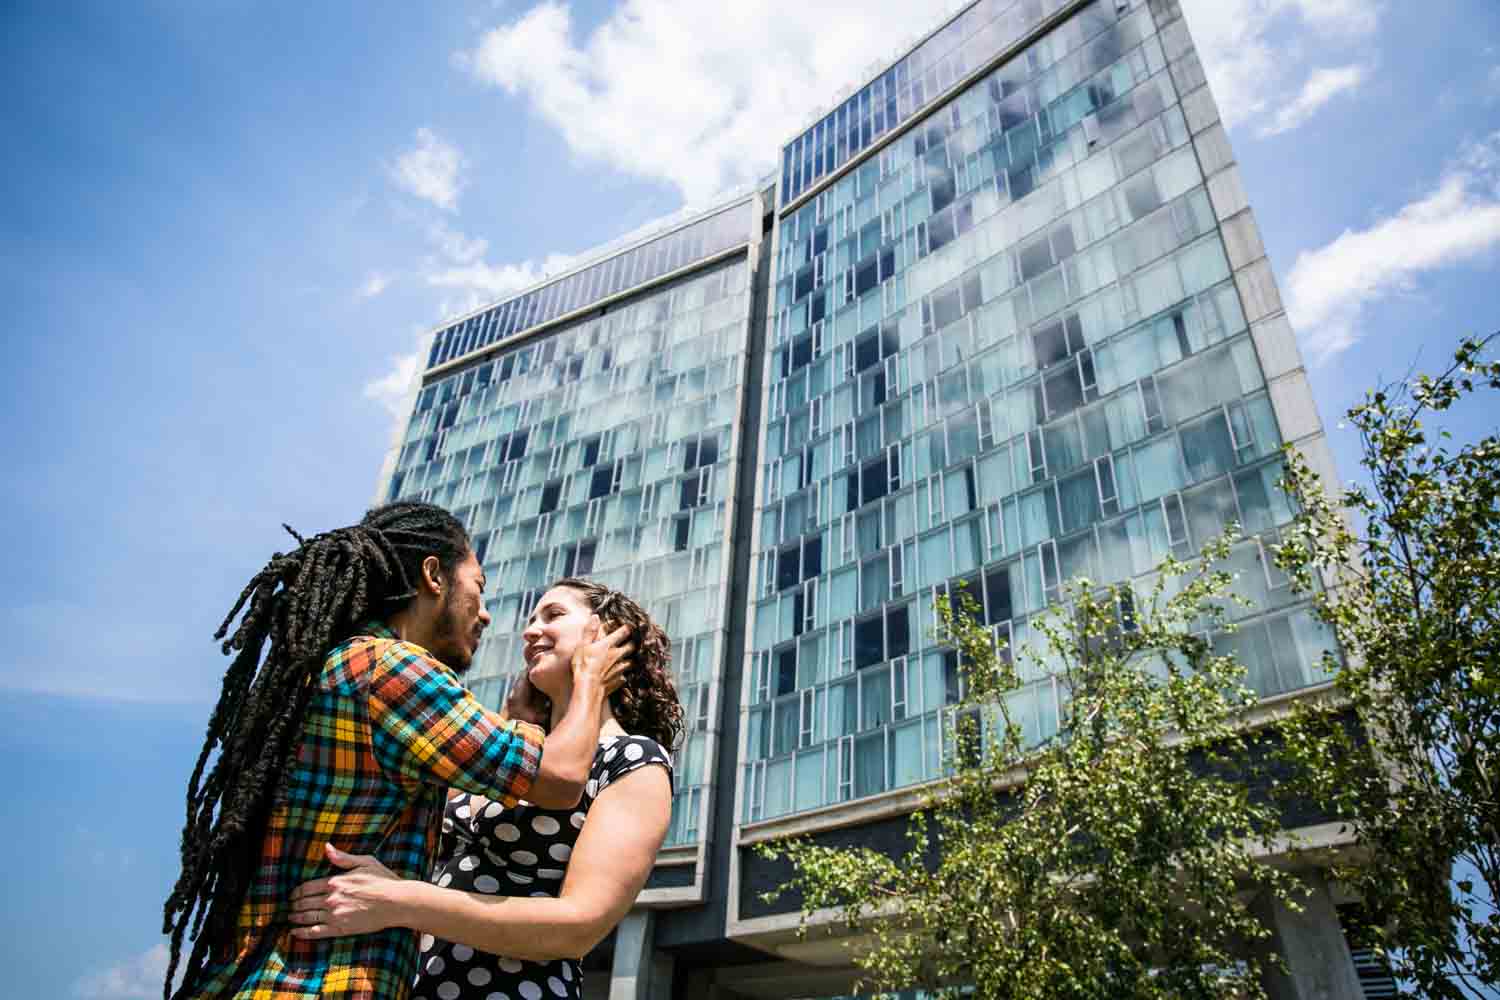 Man touching woman's face with Standard Hotel in background